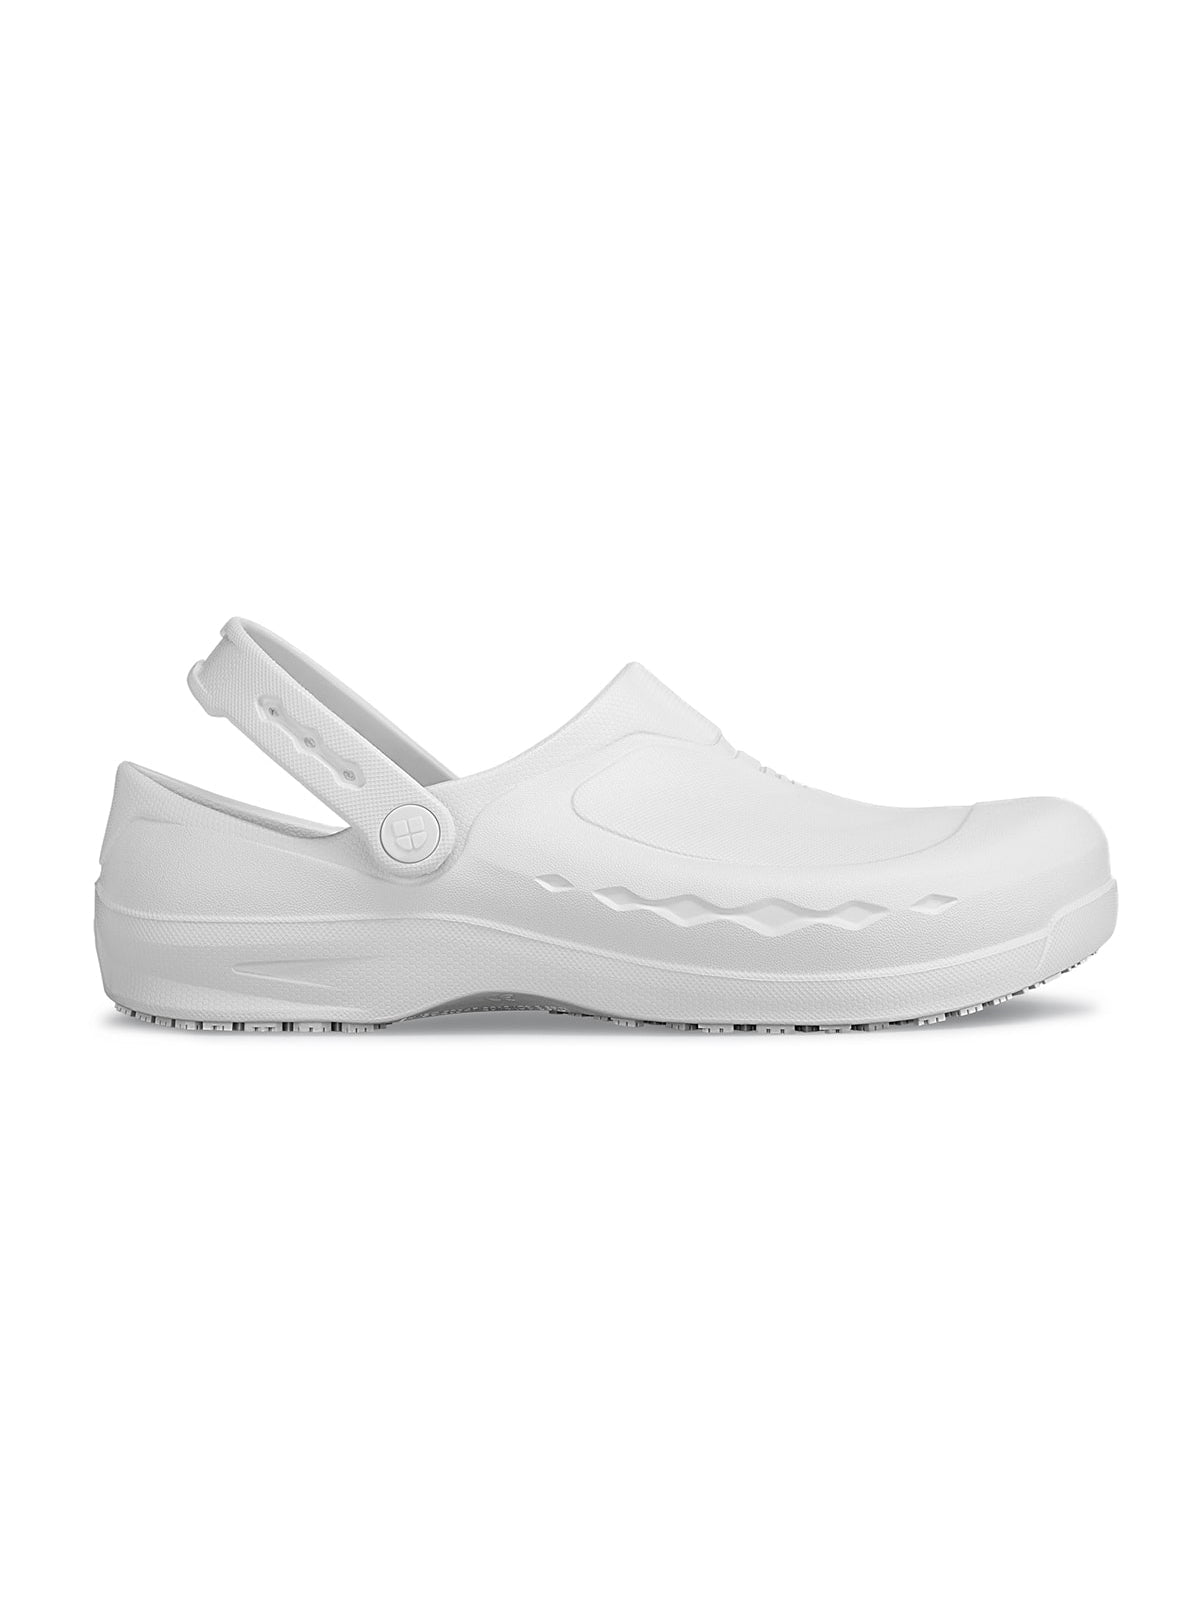 Unisex Work Shoe Zinc White by Shoes For Crews -  ChefsCotton